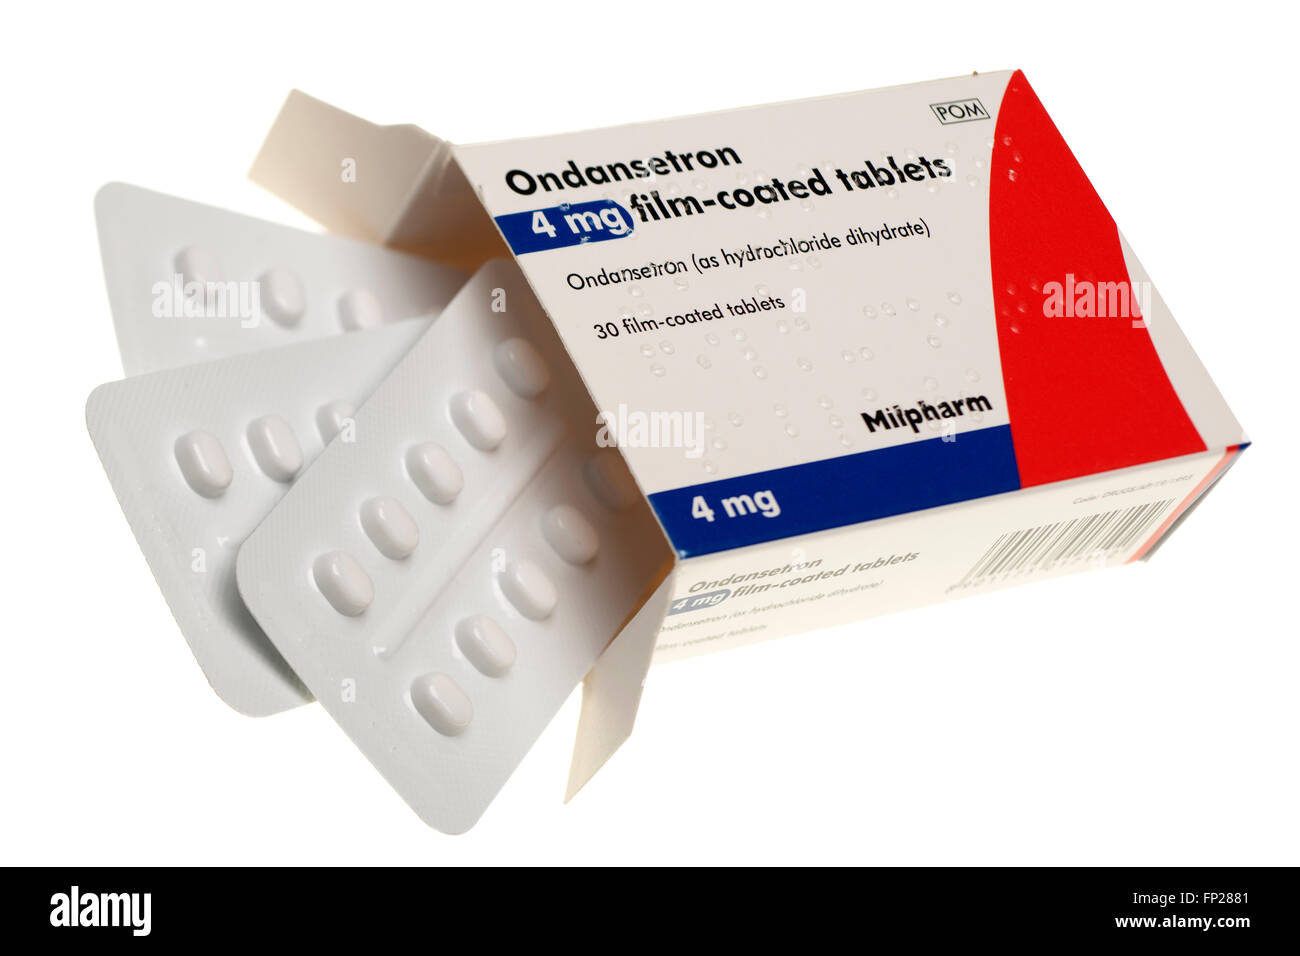 Box of 30 film-coated Milpharm Ondansetron 4mg tablets Stock Photo - Alamy